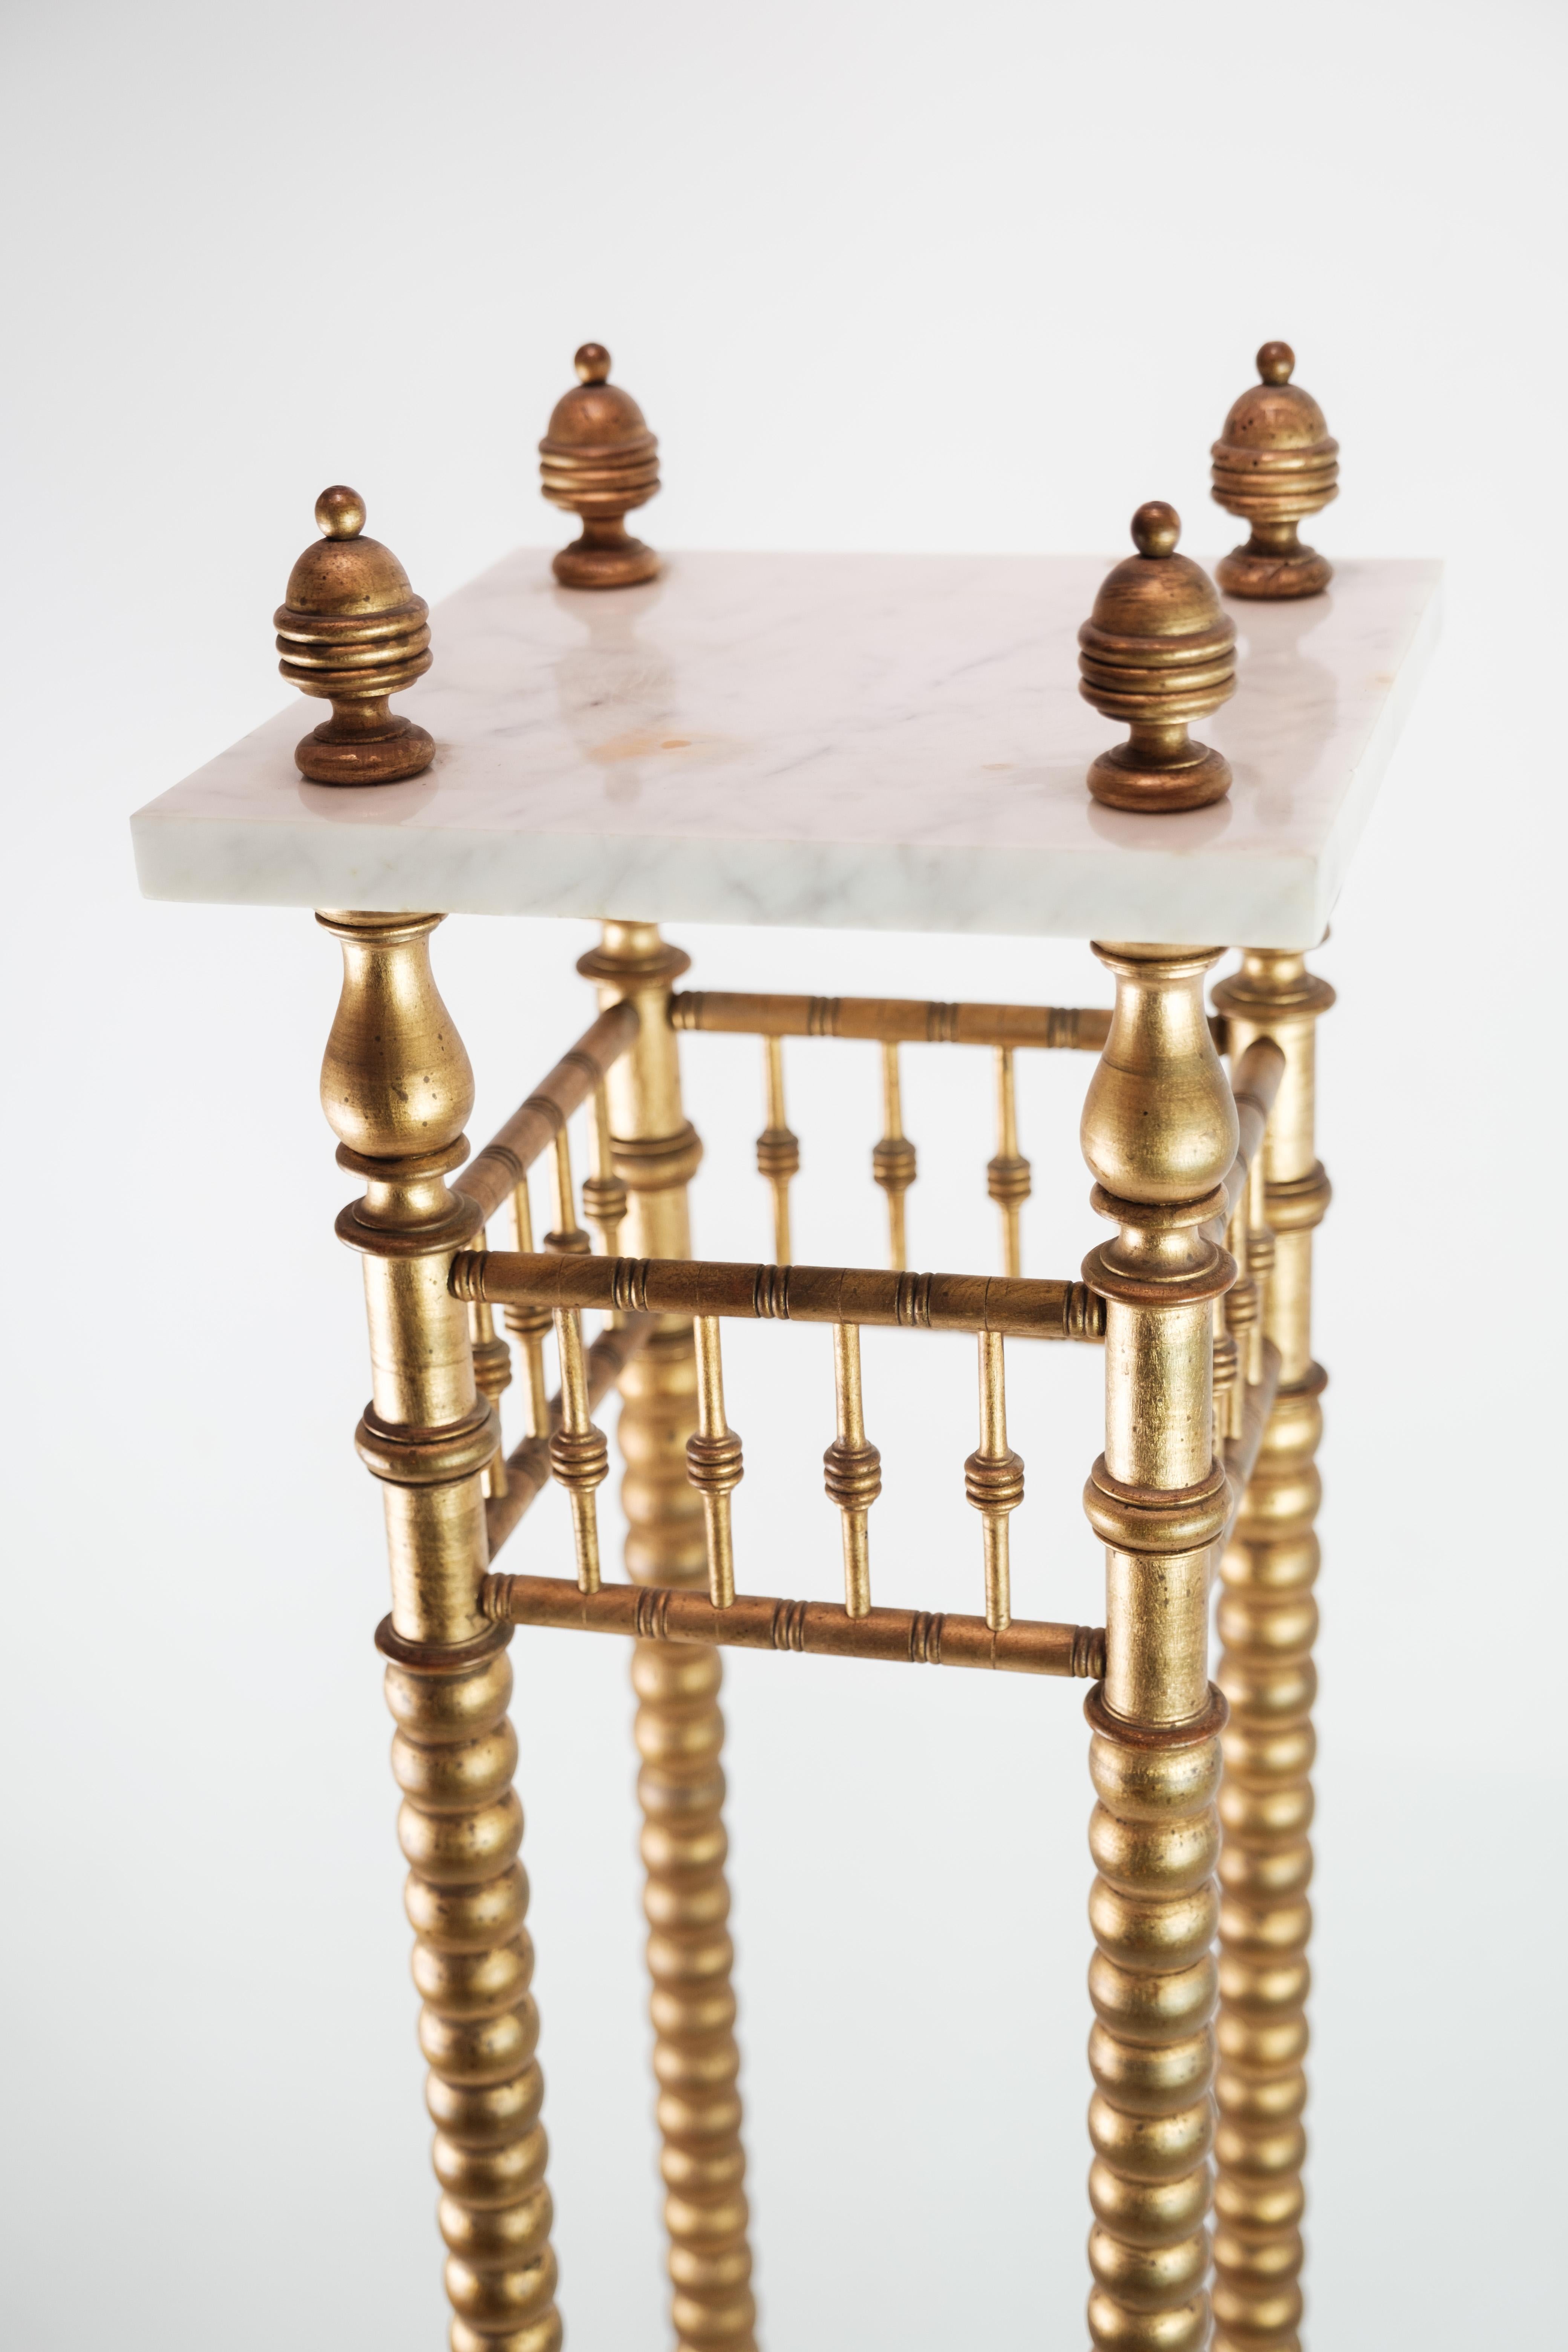 Scandinavian Modern Flowers Stand With Gilded Columns & Marble Slabs From 1930s For Sale